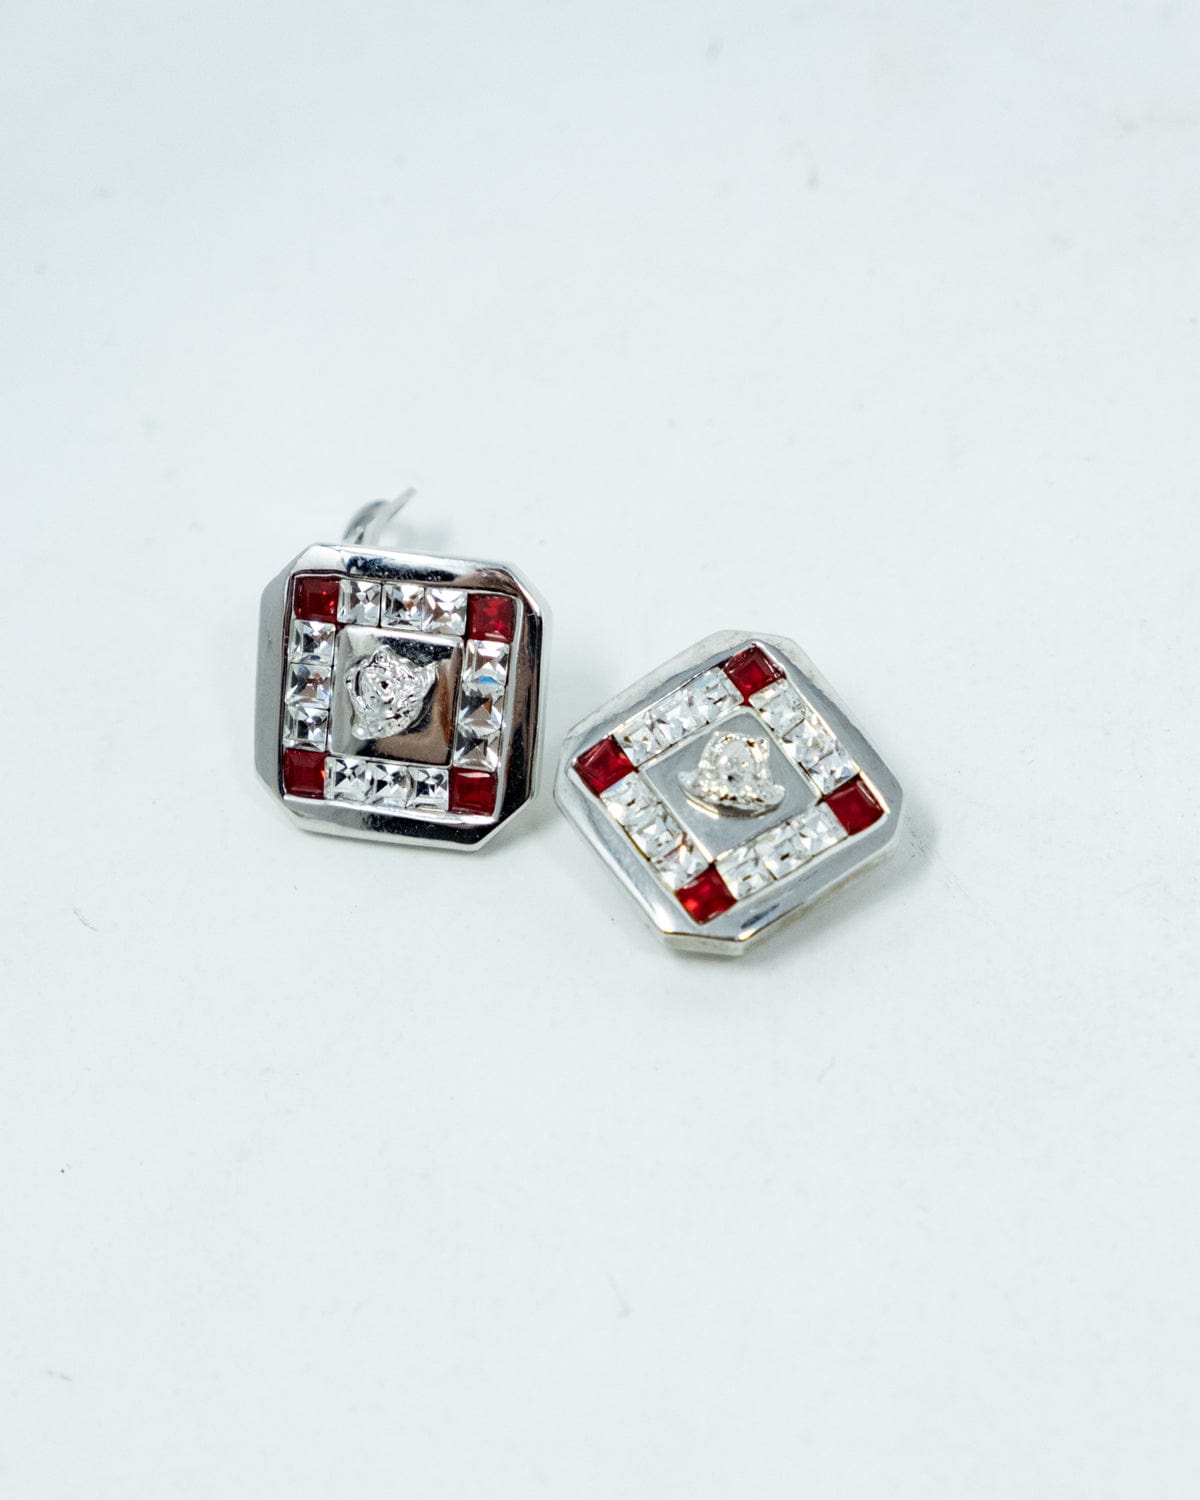 Versace Gianni Versace Square Silver and Red Medusa Earrings - AGL1746